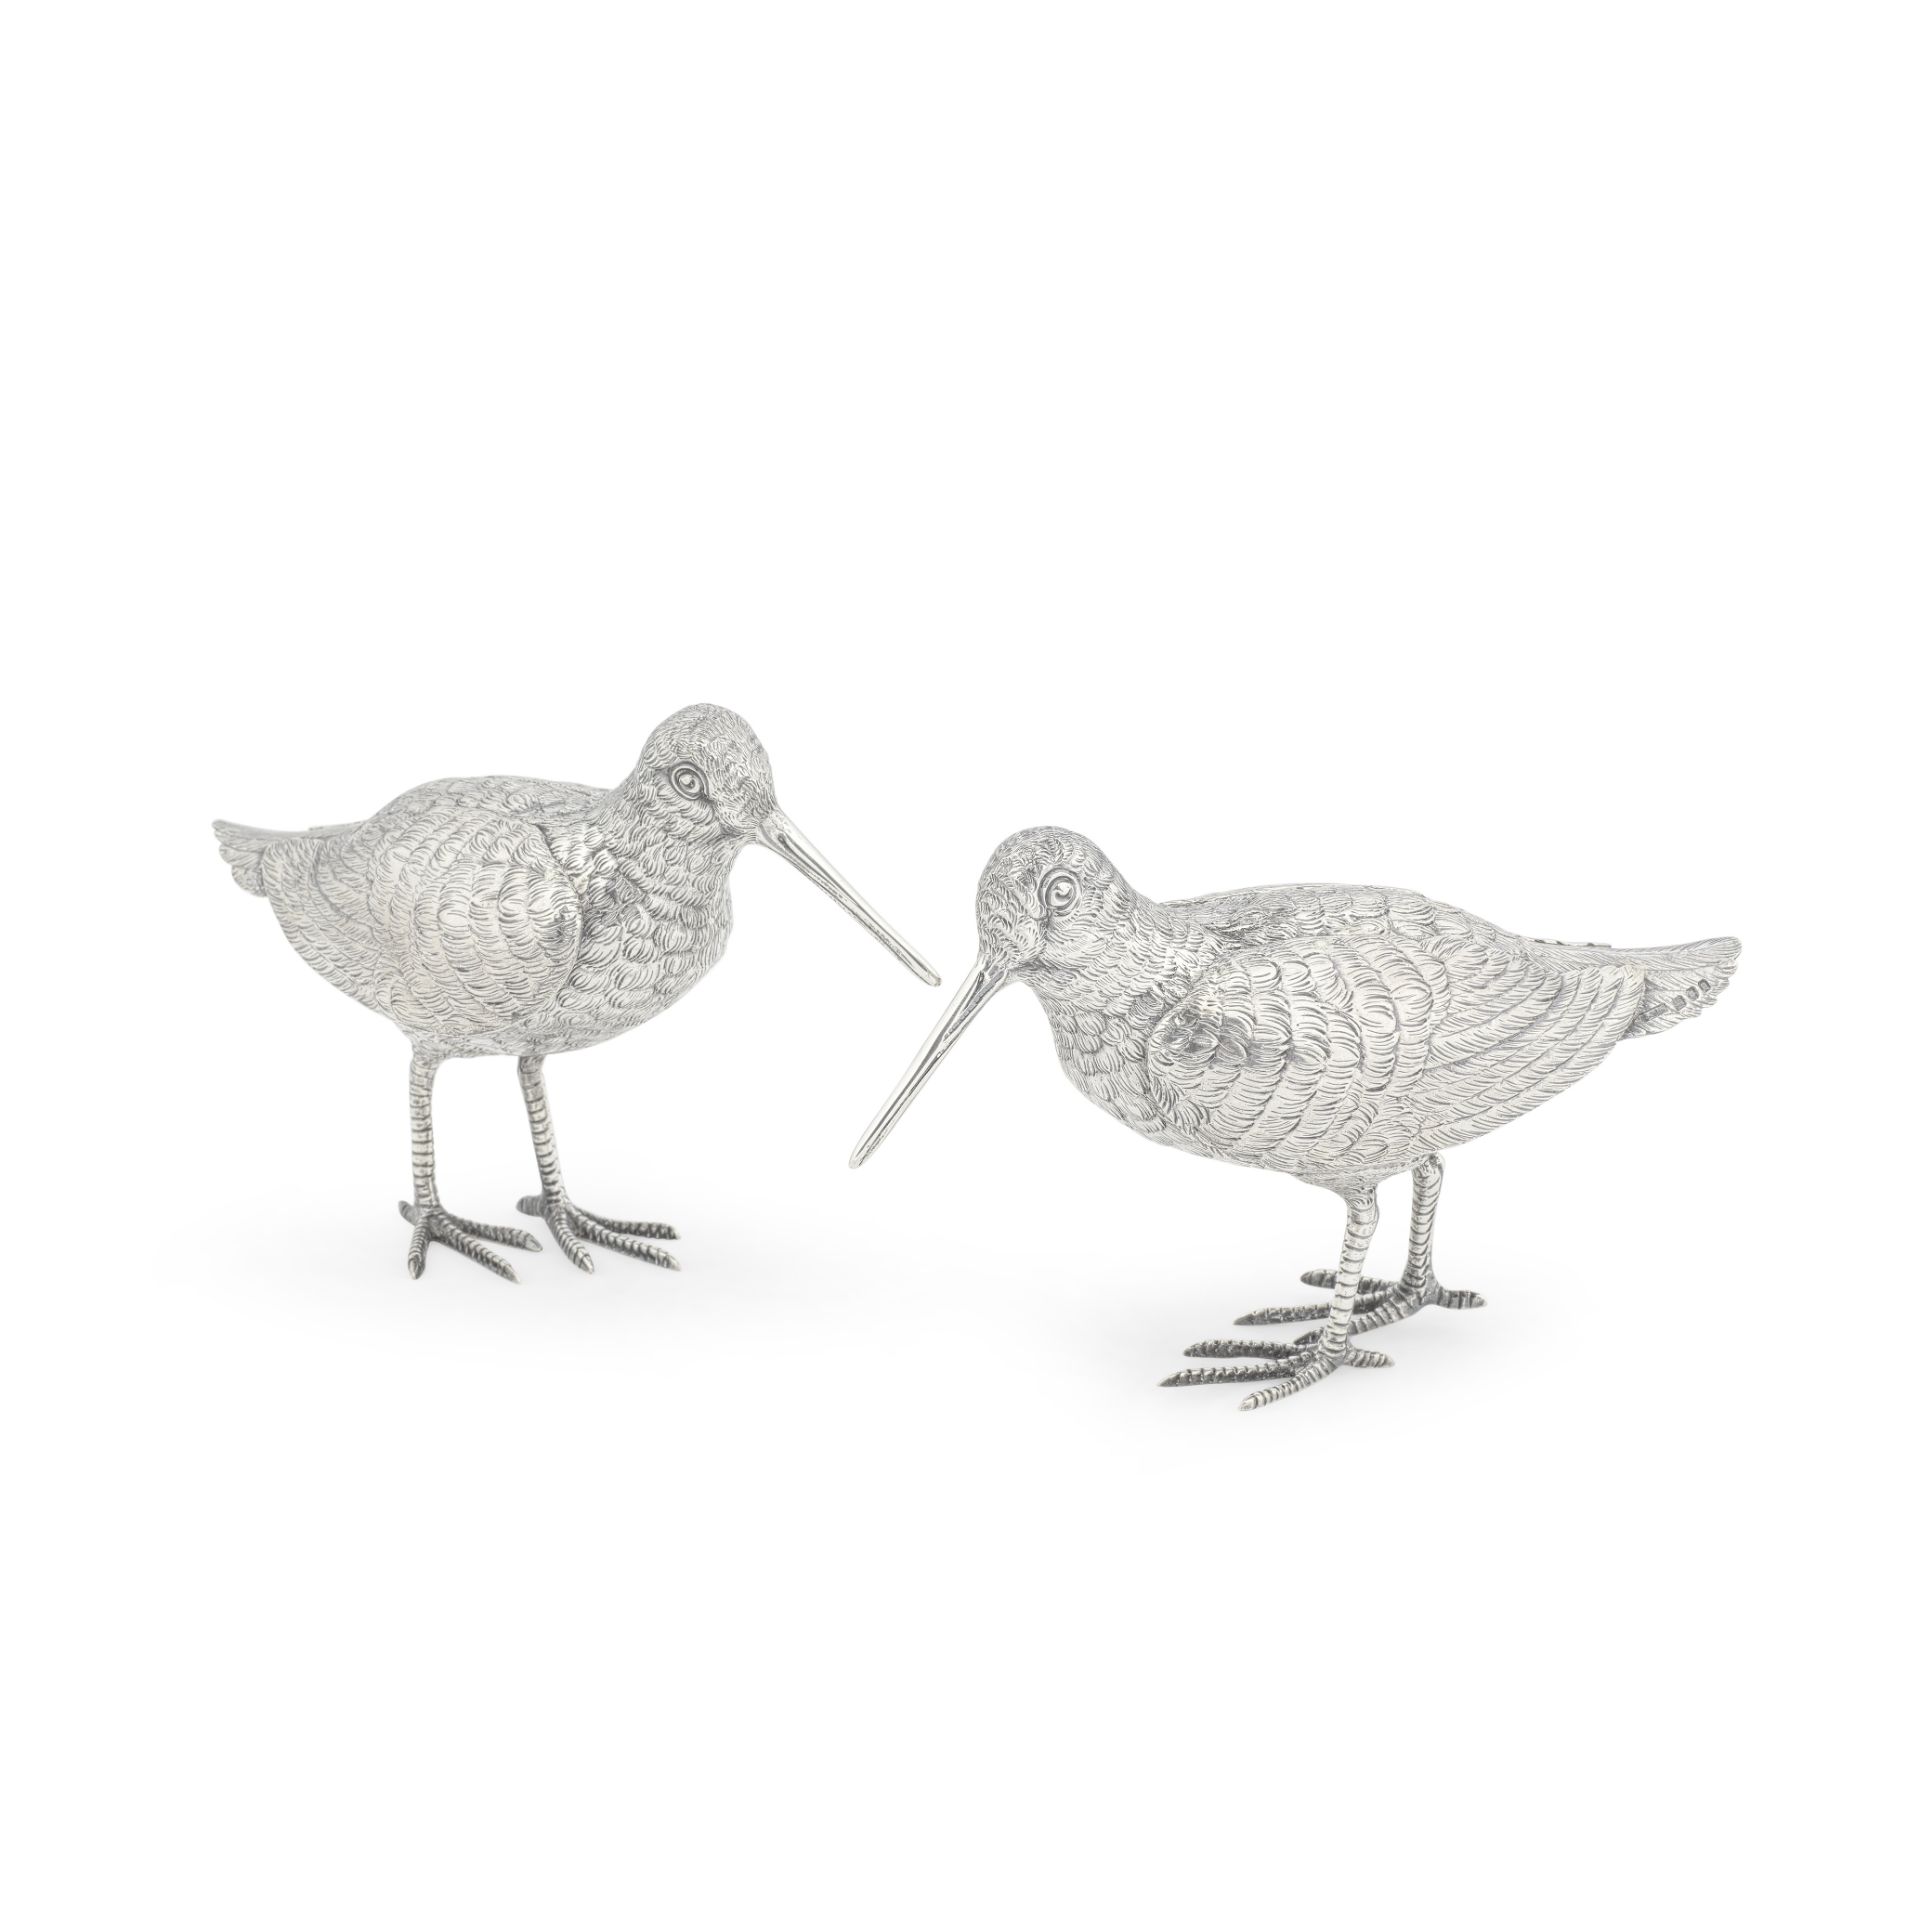 A pair of silver table ornaments modelled as snipes Asprey & Co Ltd, London 1939 (2)